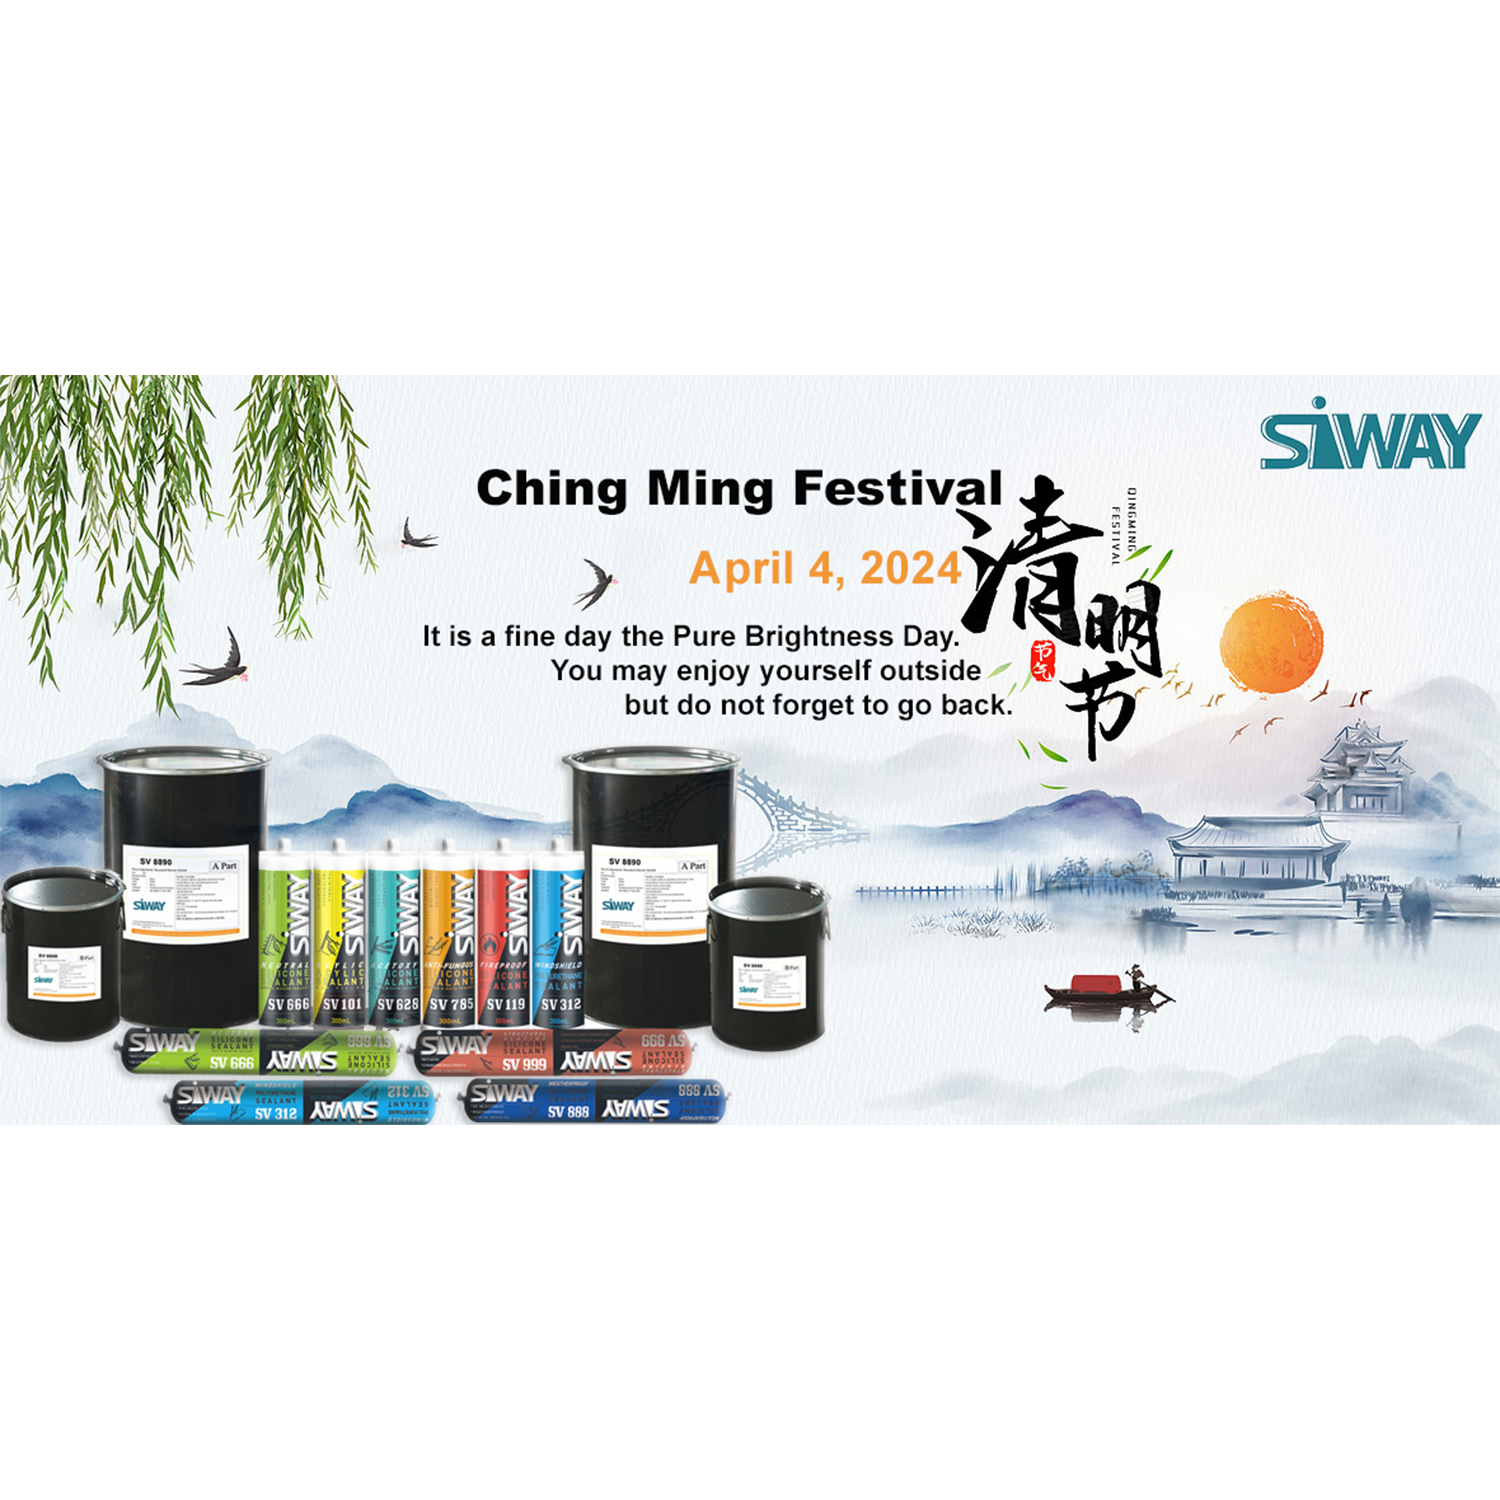 Ching Ming Festival, the four major traditional festivals in China